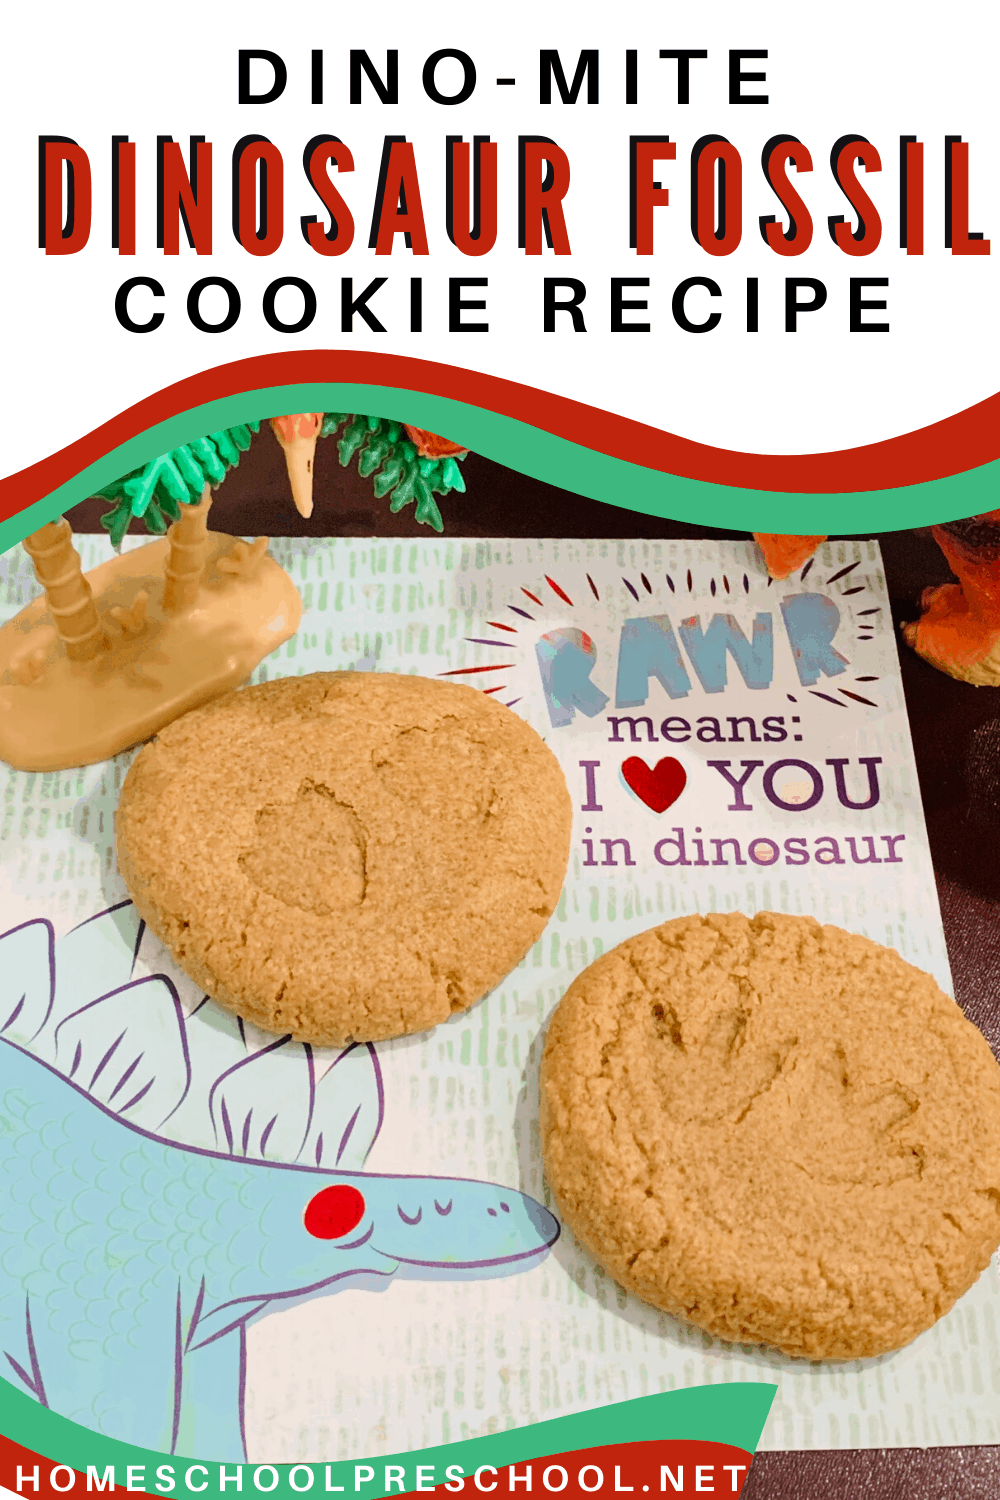 You won't believe how easy it is to mix up a batch of dinosaur cookie fossils with your preschooler! They'll love this dino-mite snack idea!